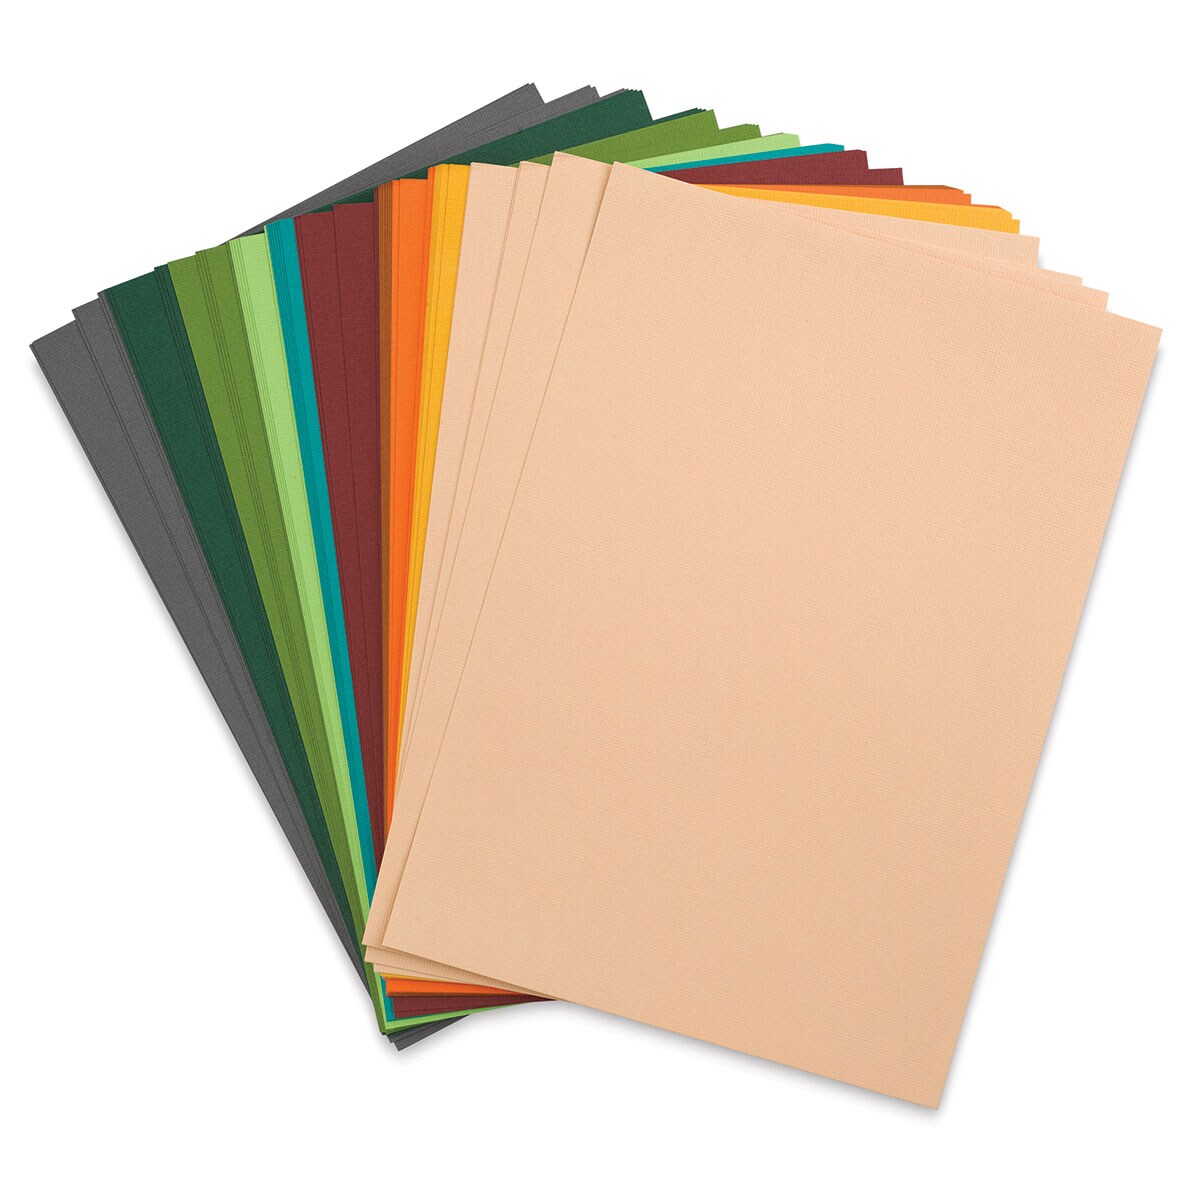 Sizzix Surfacez Cardstock - Eclectic Colors, Package of 60 Sheets, 8-1/4&#x22;W x 11-3/4&#x22;L, 216 gsm